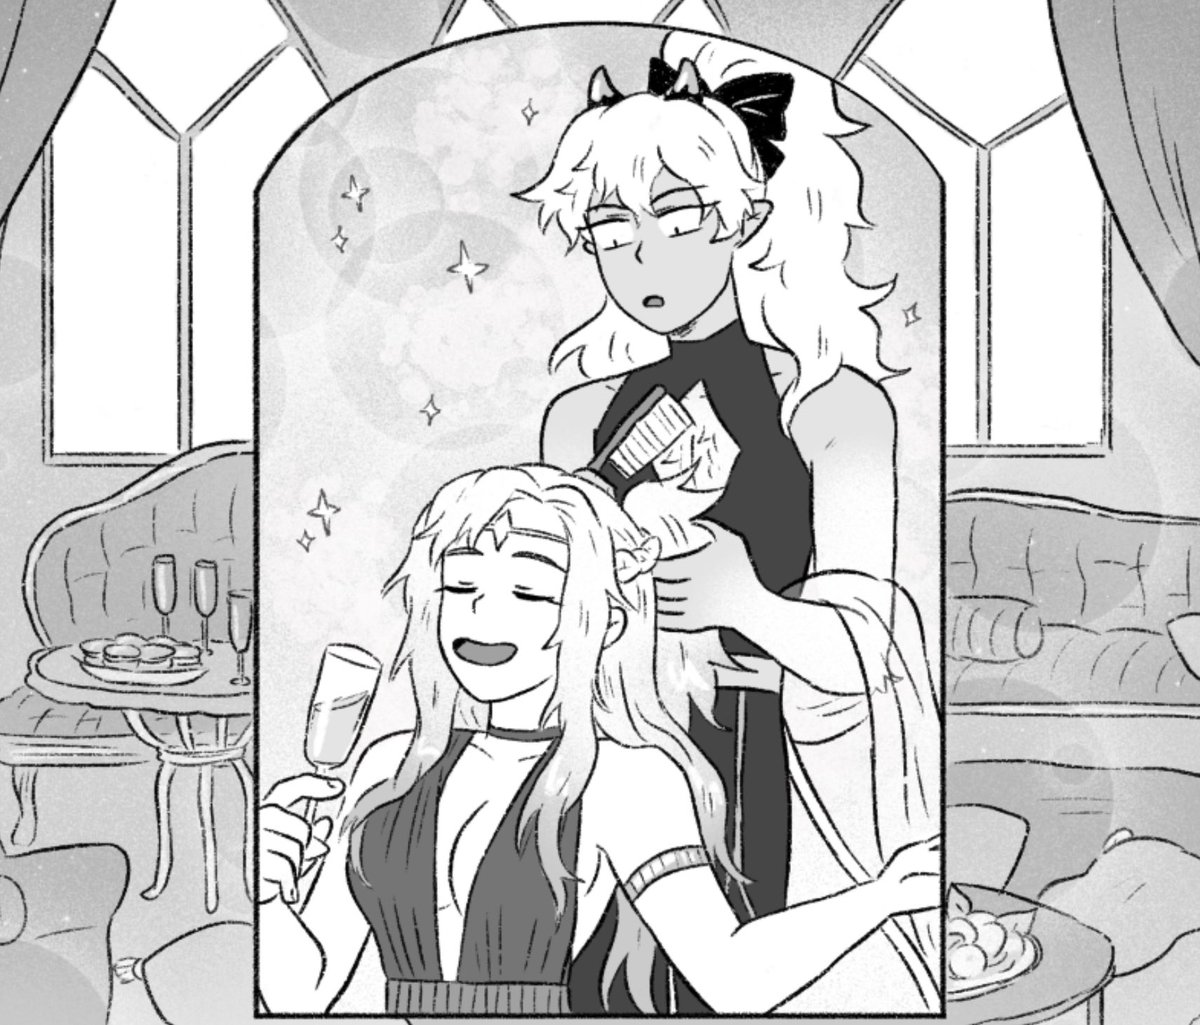 ✨Page 225 of Sparks is up!✨
It's Pallas and the Princess!

✨ https://t.co/haTuWPKST0
✨Tapas https://t.co/vAFmc4XA7S
✨Support & read ahead https://t.co/Pkf9mTOYyv 